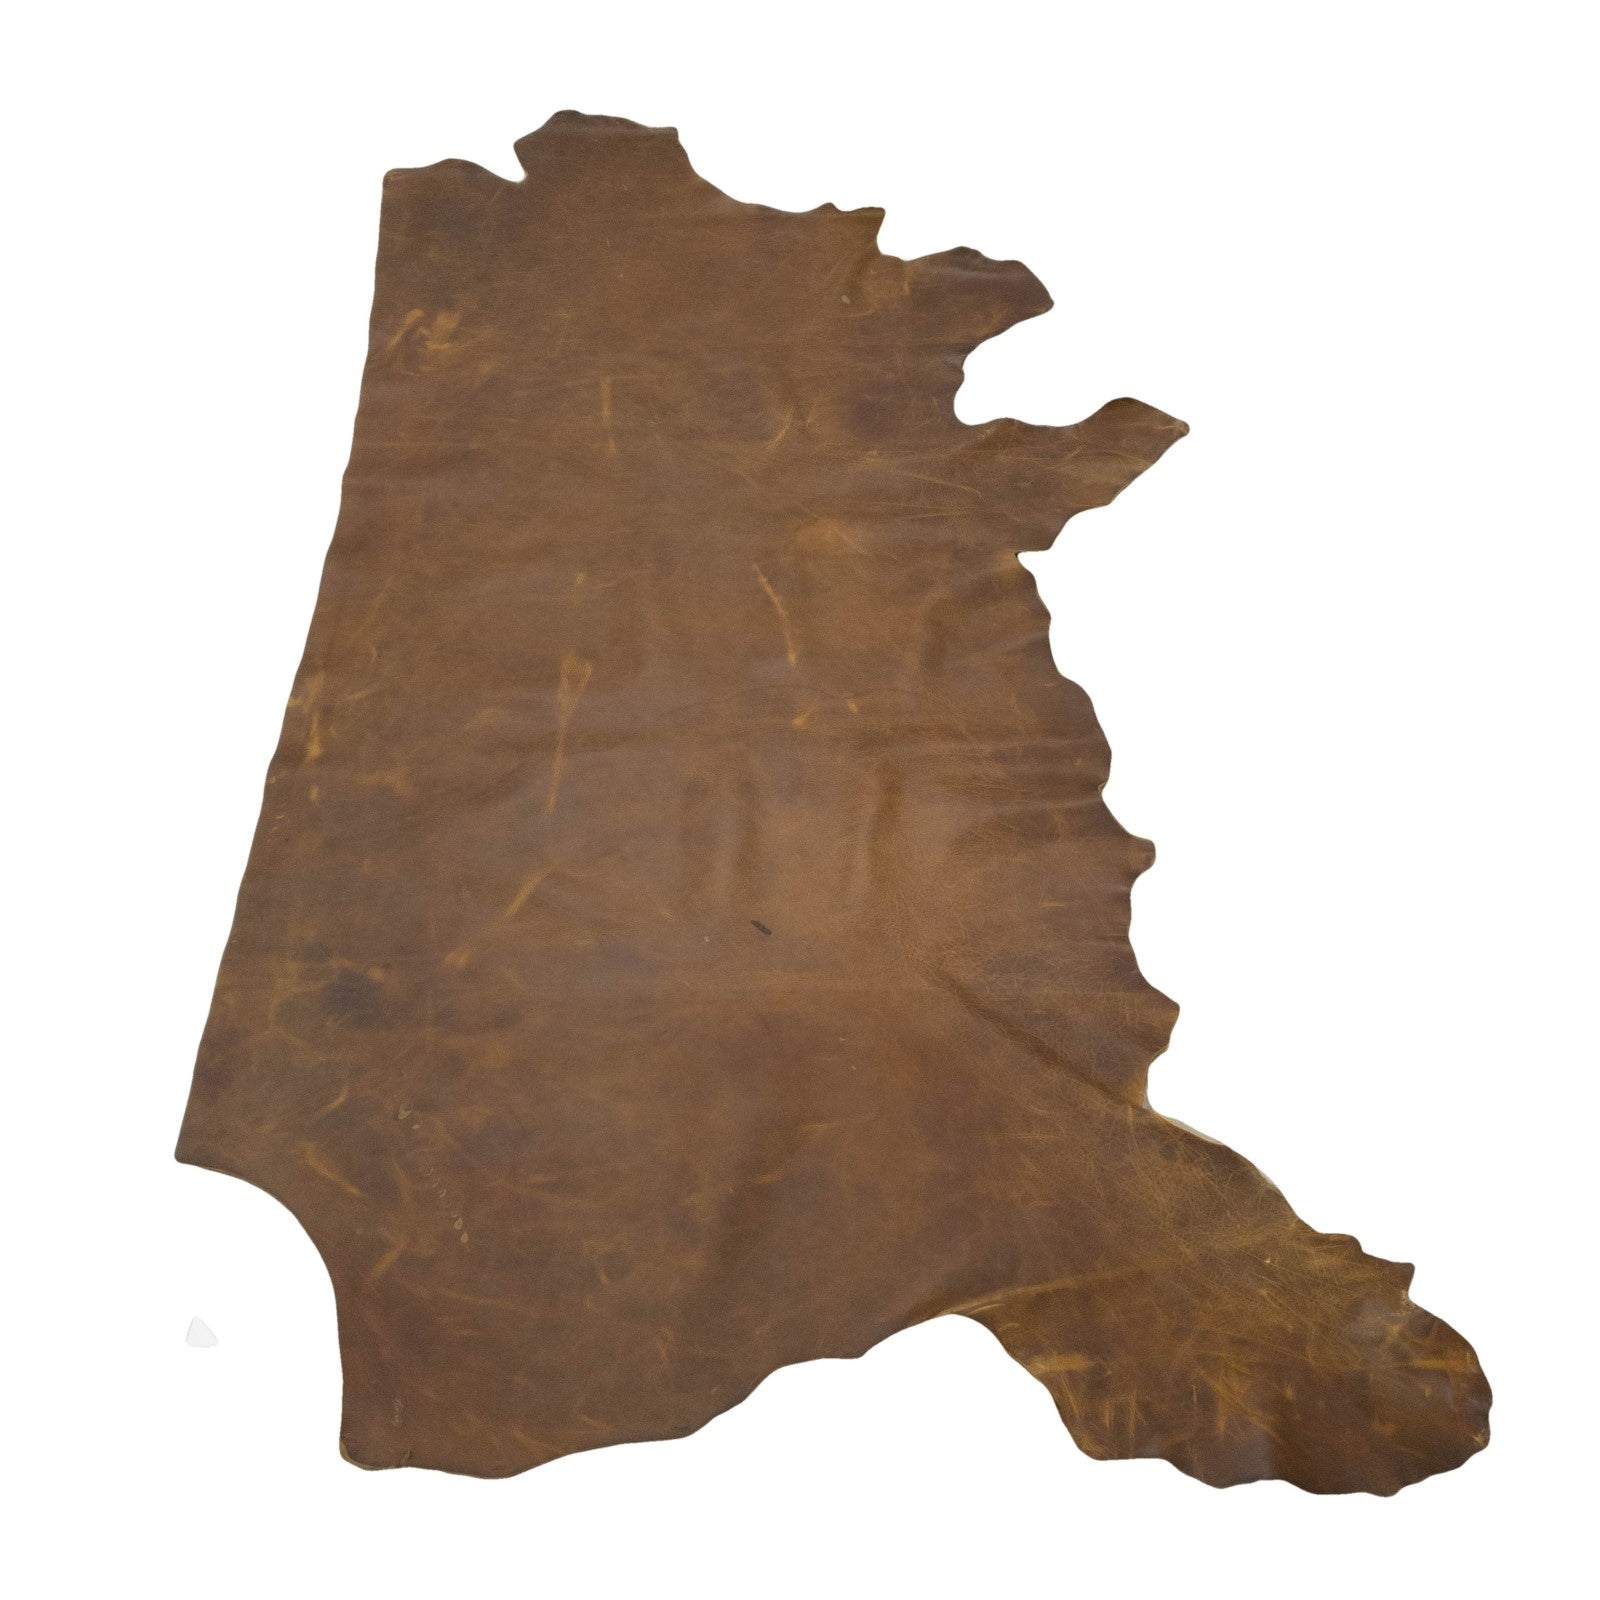 Tan, 4-5 oz, 18-29 Sq Ft, Chap Cow Side, 24-26 / Economy | The Leather Guy